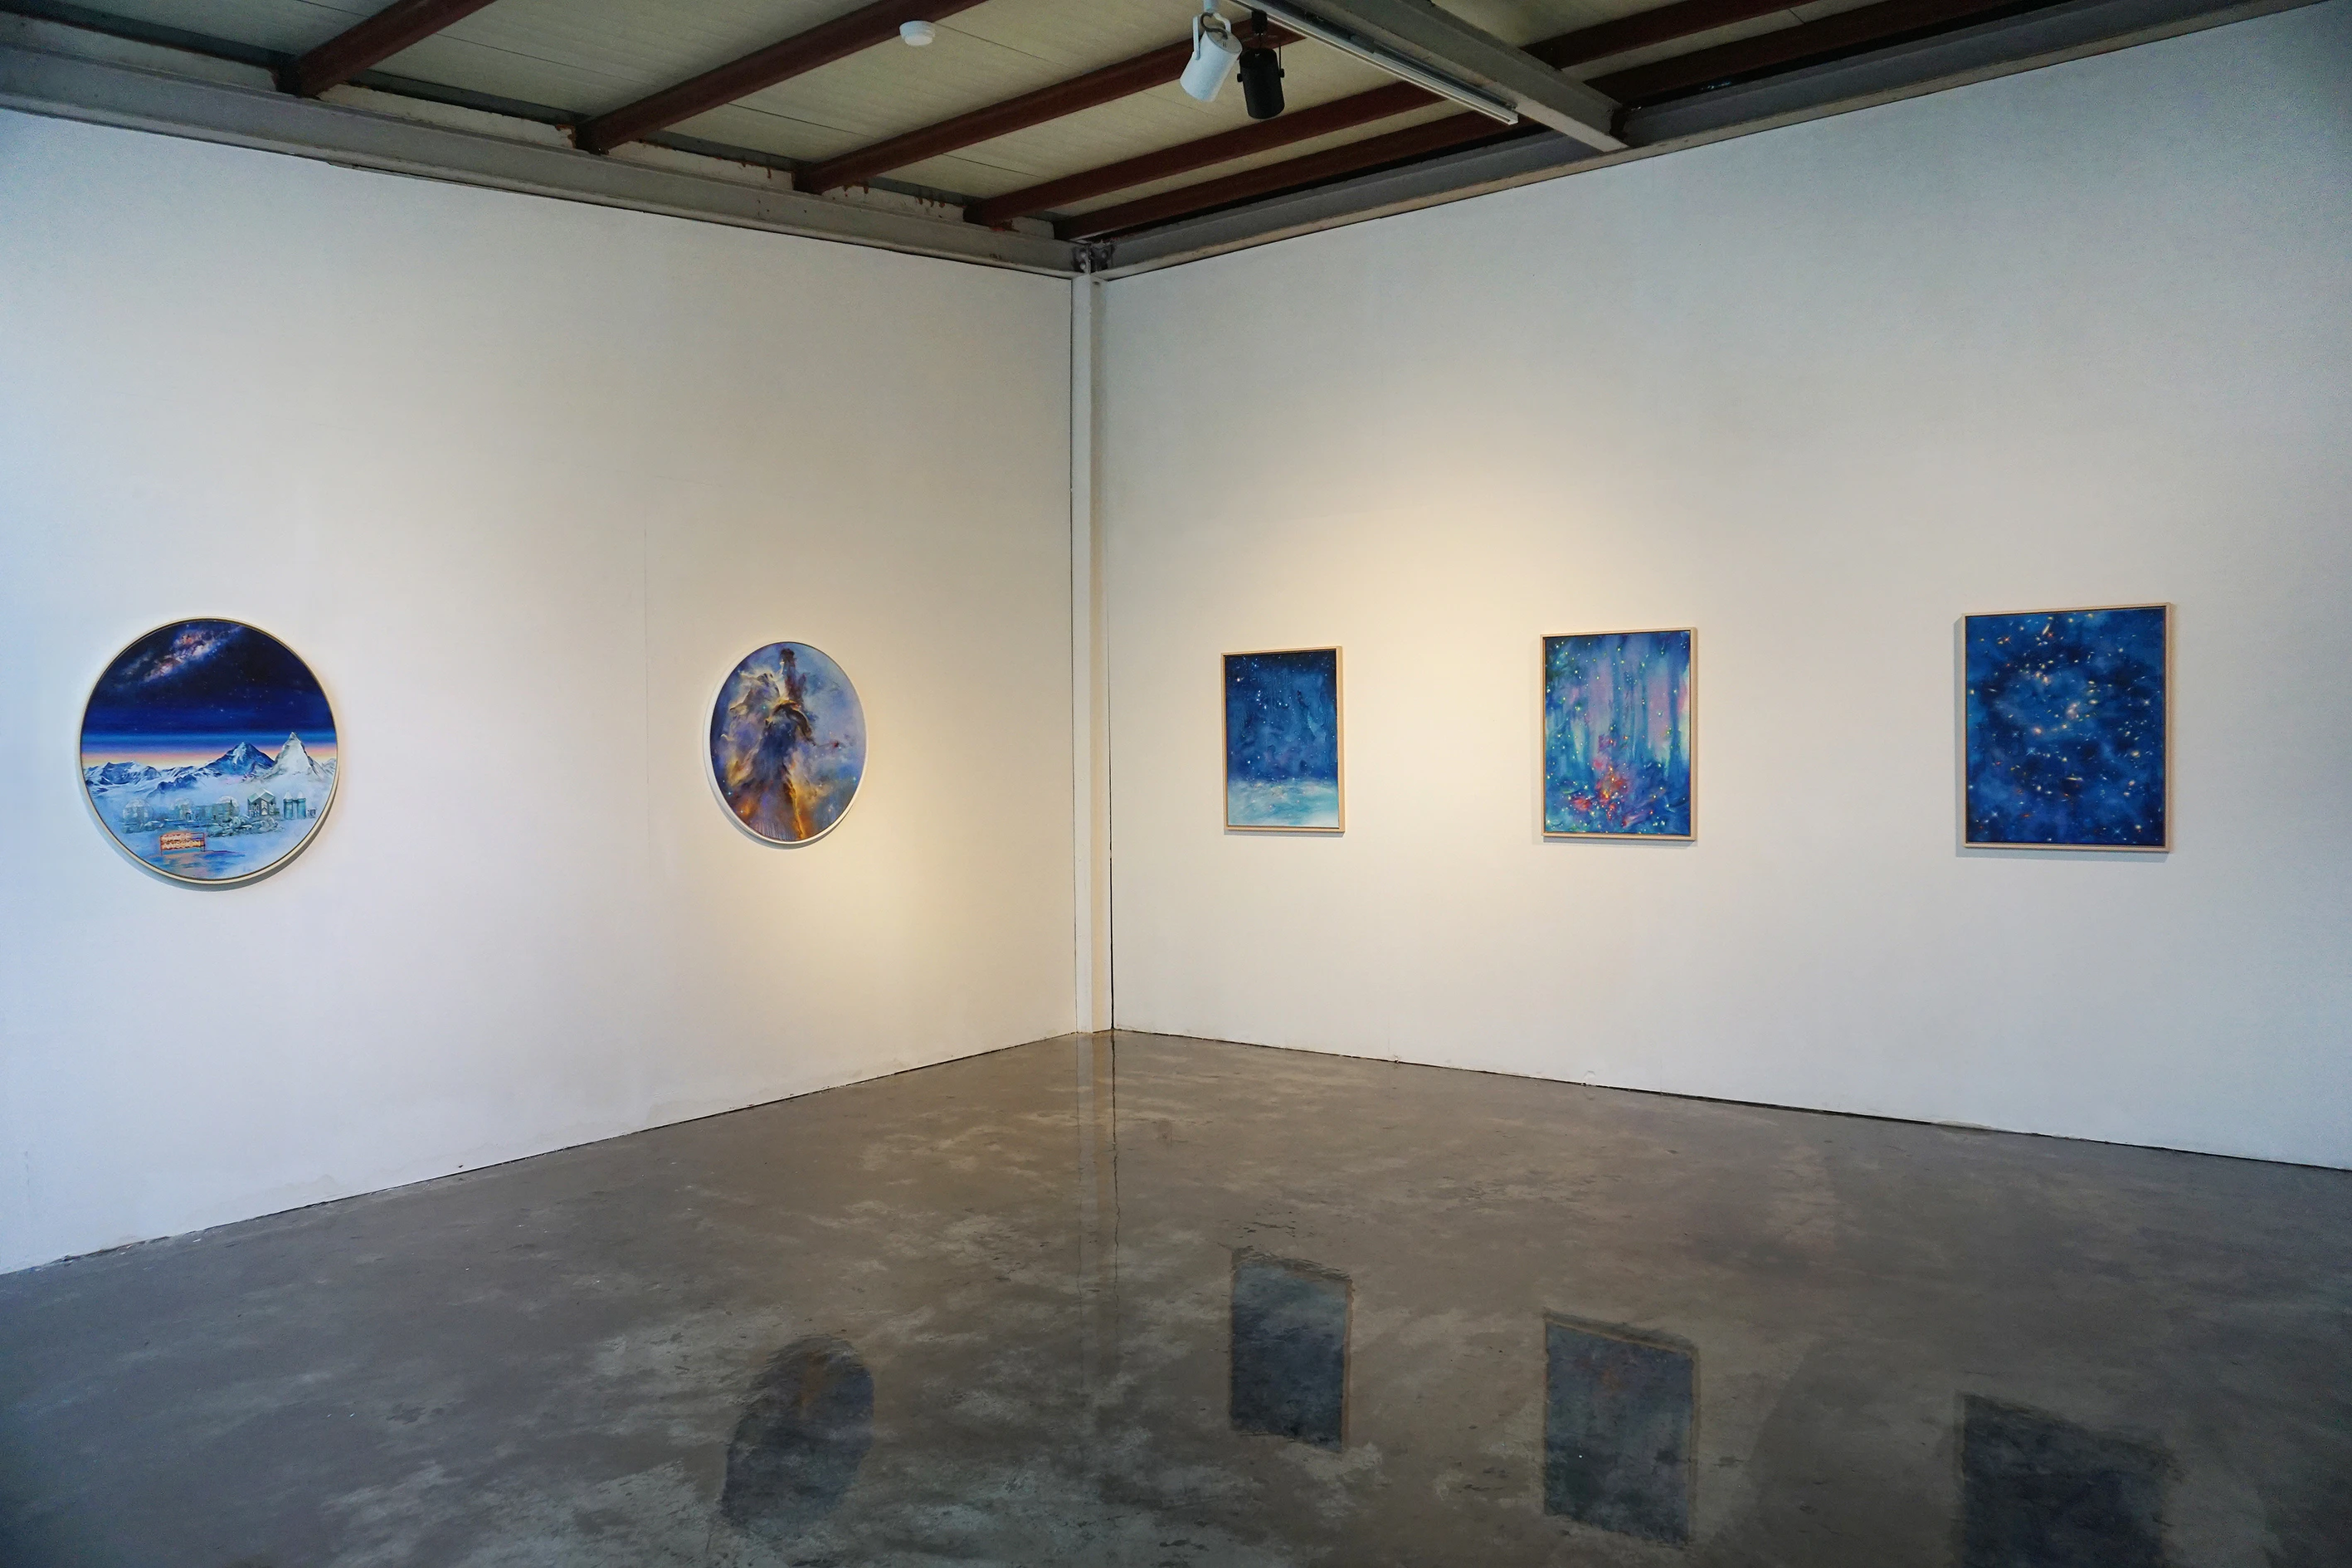 Installation view at CICA Museum